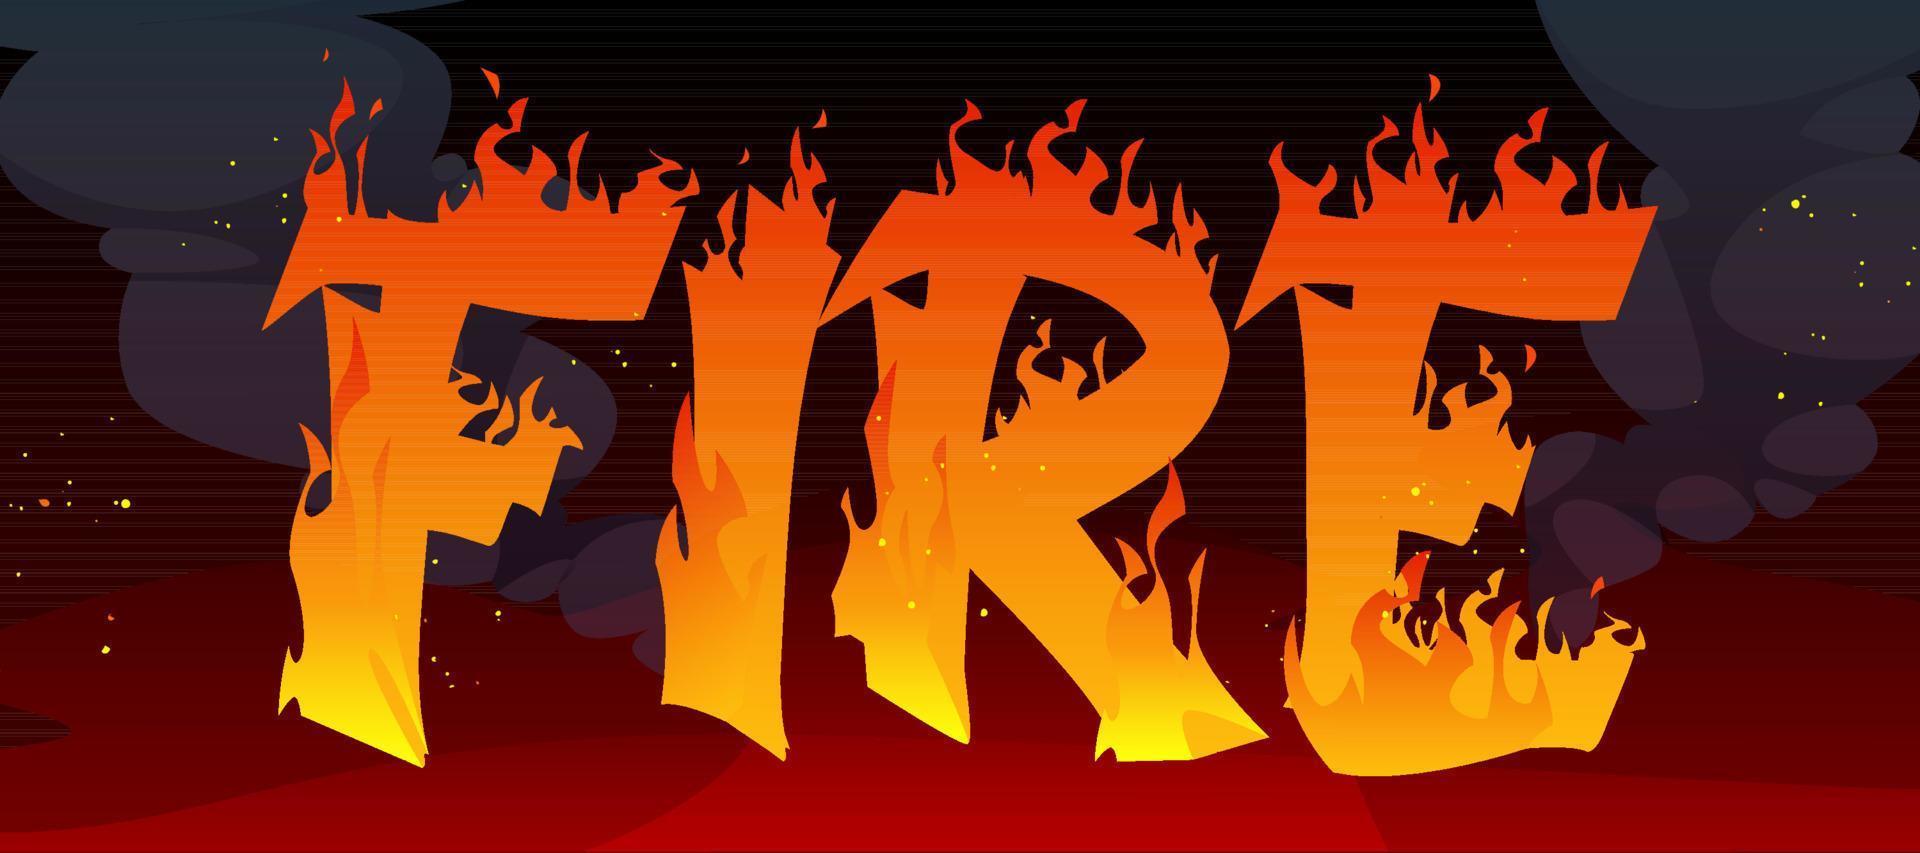 Fire banner with text in flame and black smoke vector